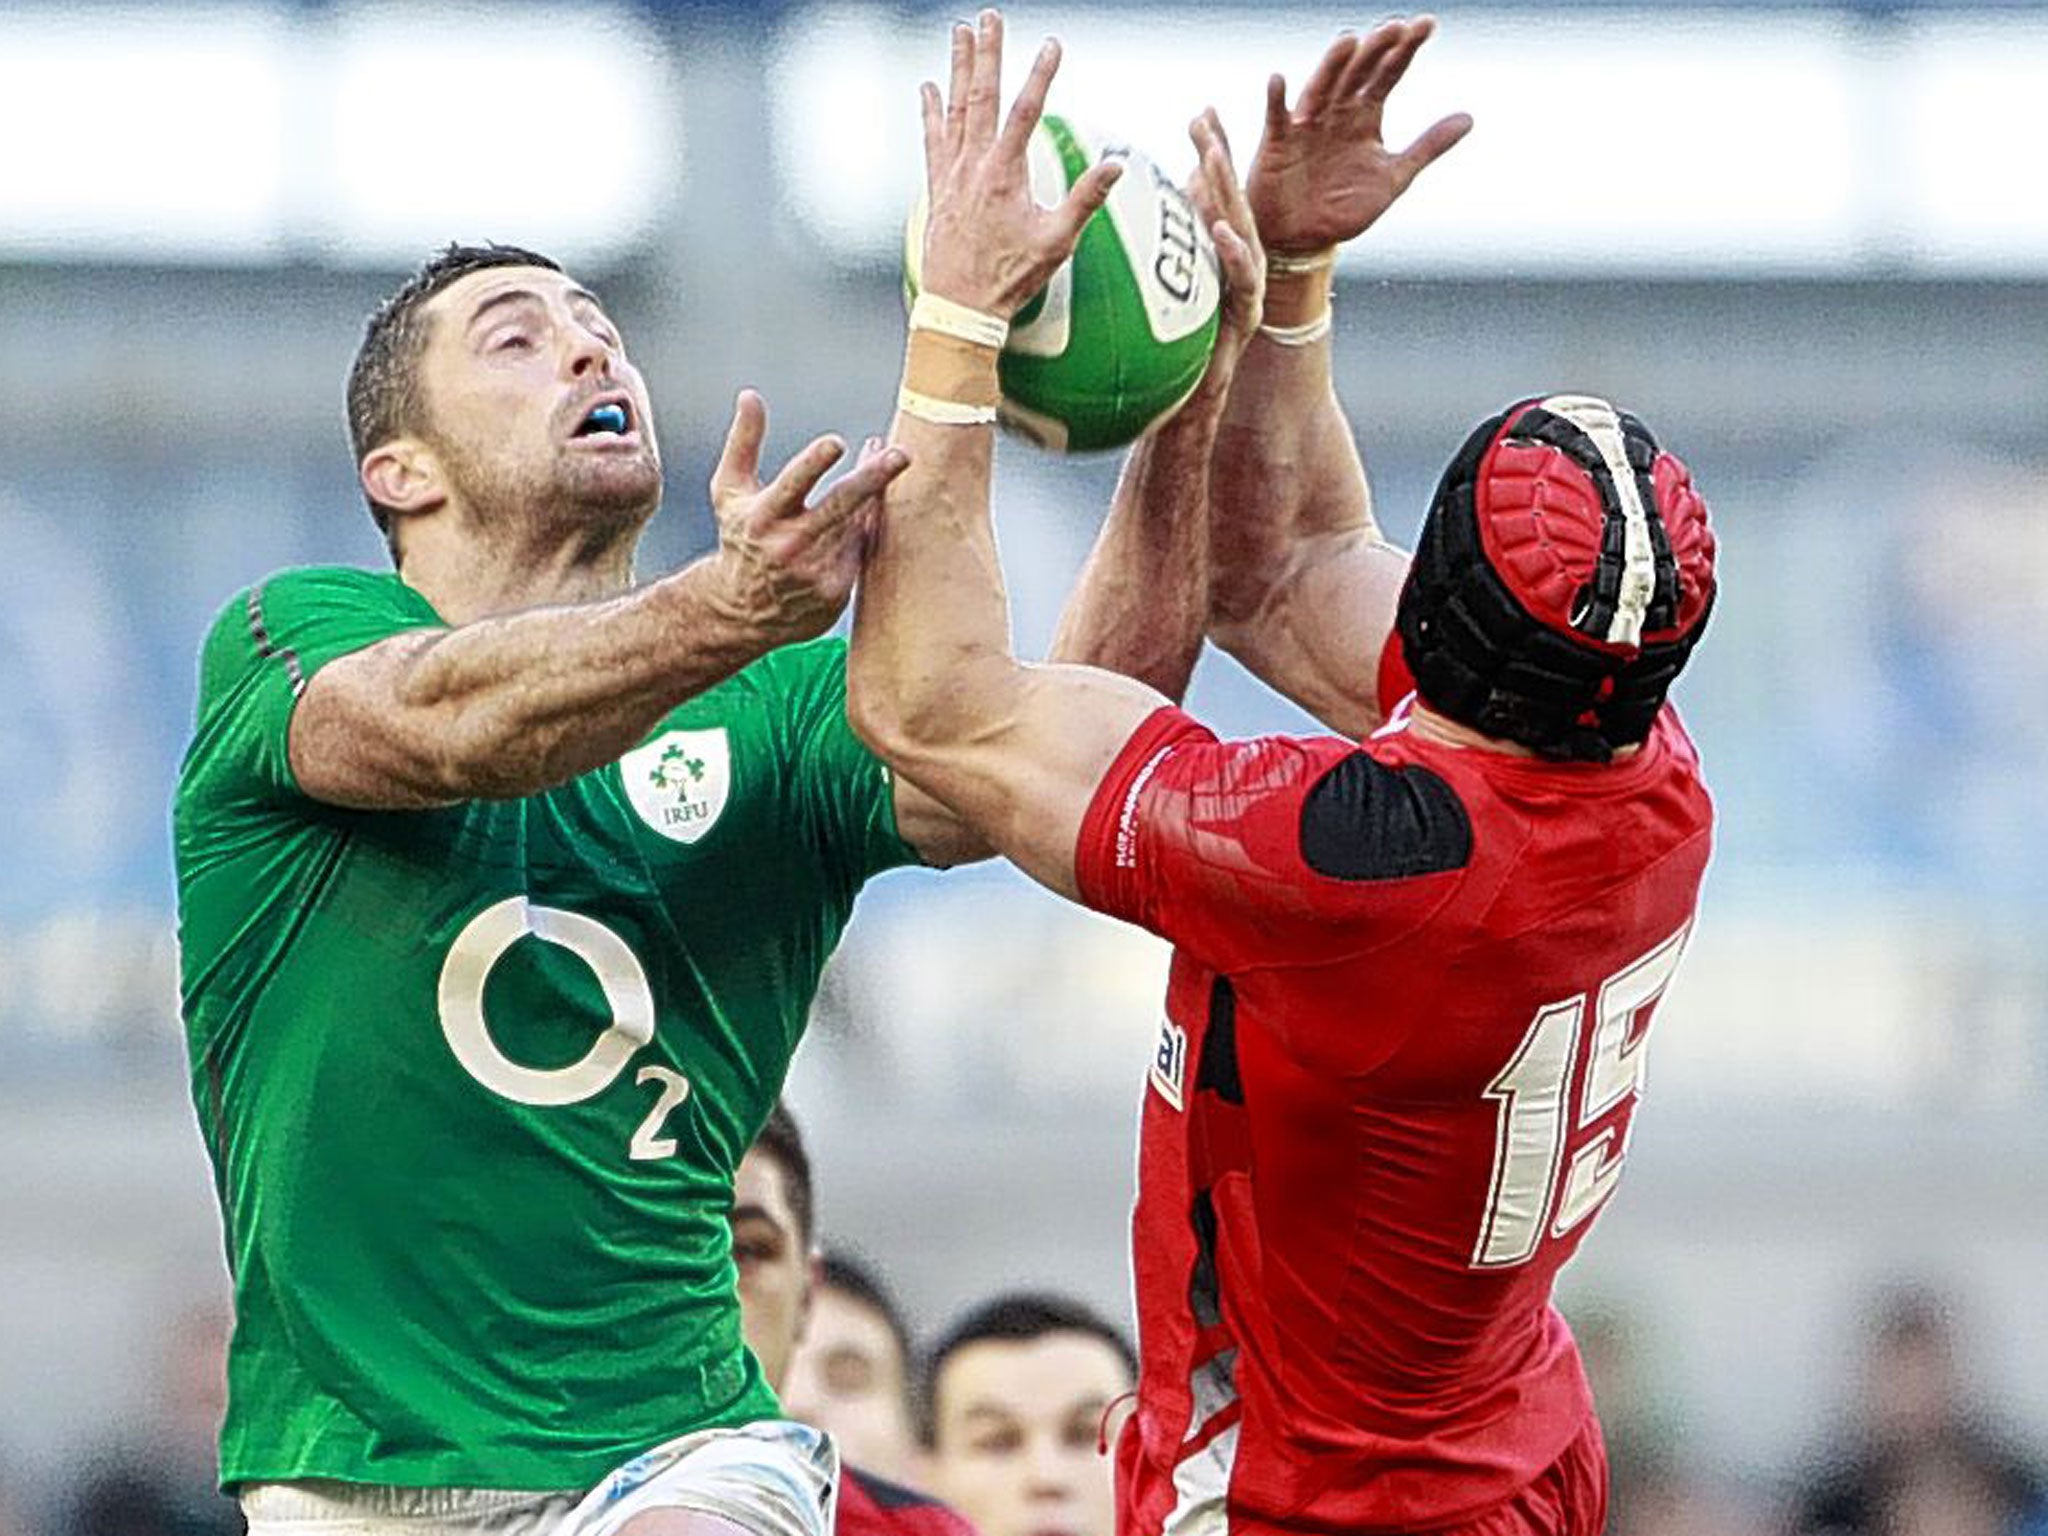 Ireland’s Rob Kearney (left) and Leigh Halfpenny contest a high kick during Wales’ disappointing 26-3 defeat